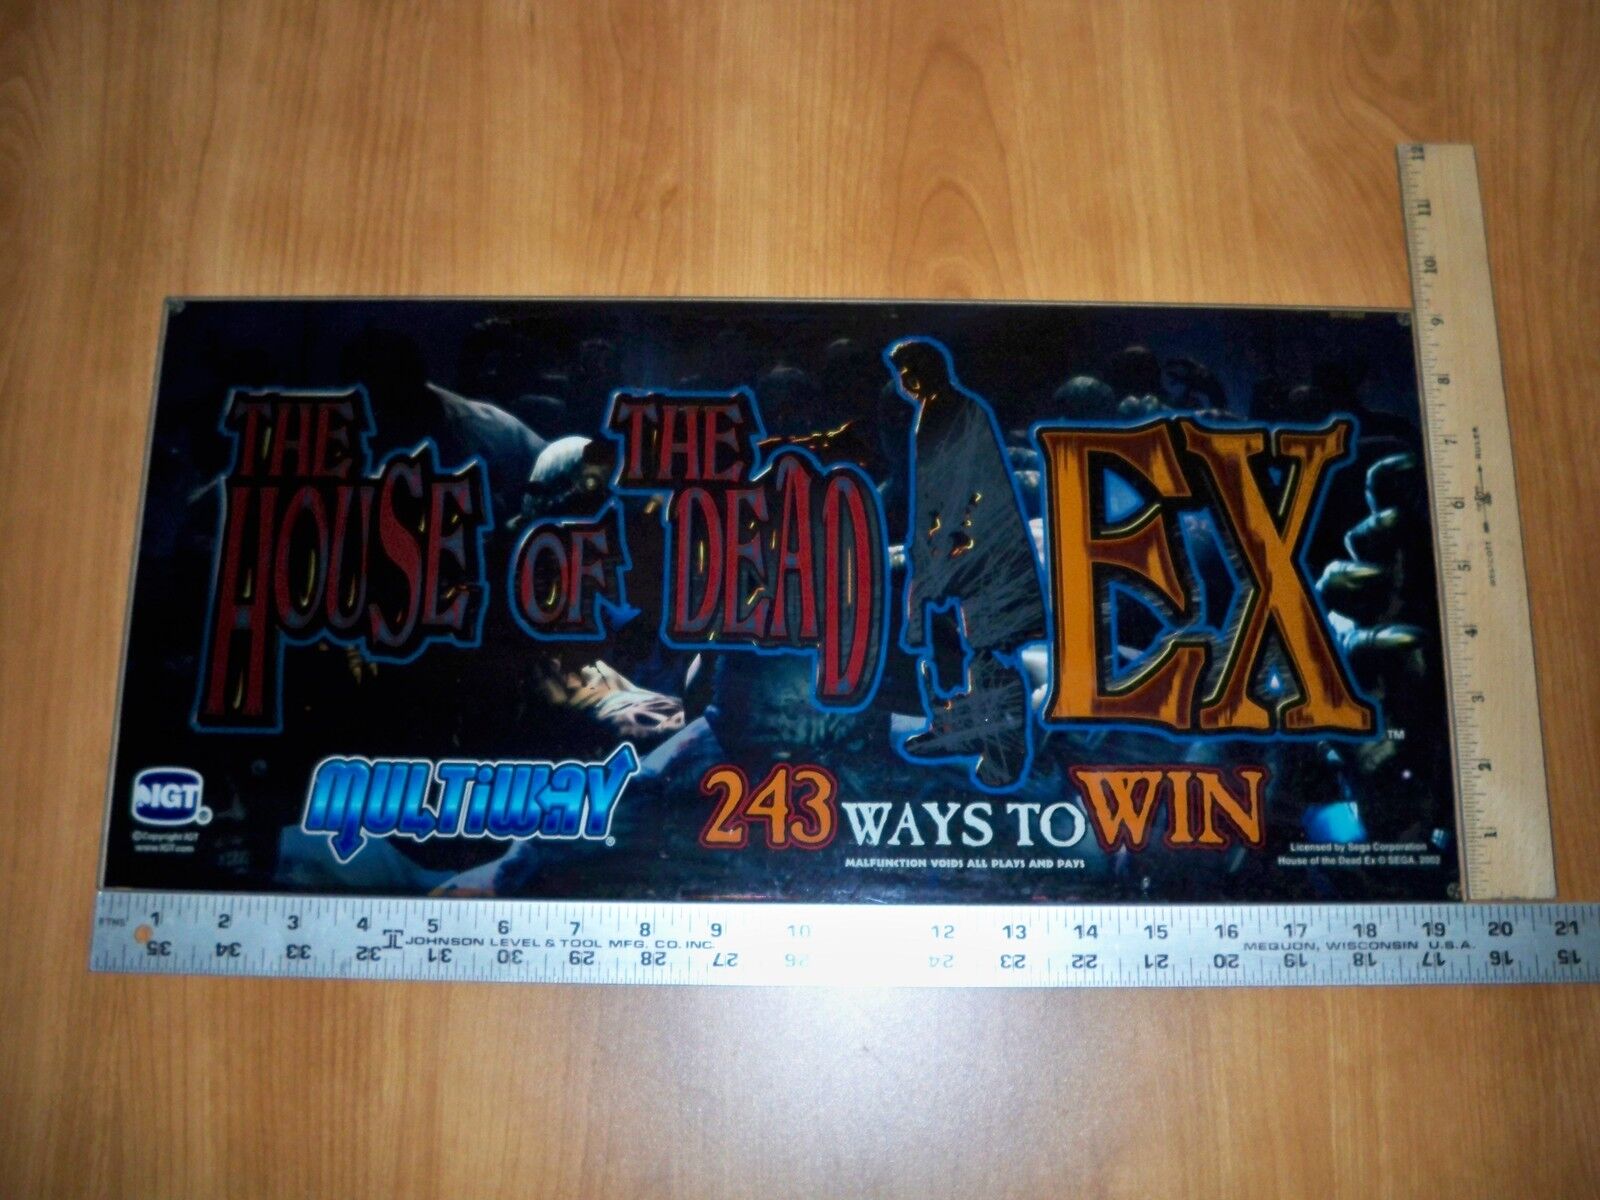 IGT The House of the Dead EX Slot Machine Glass - 